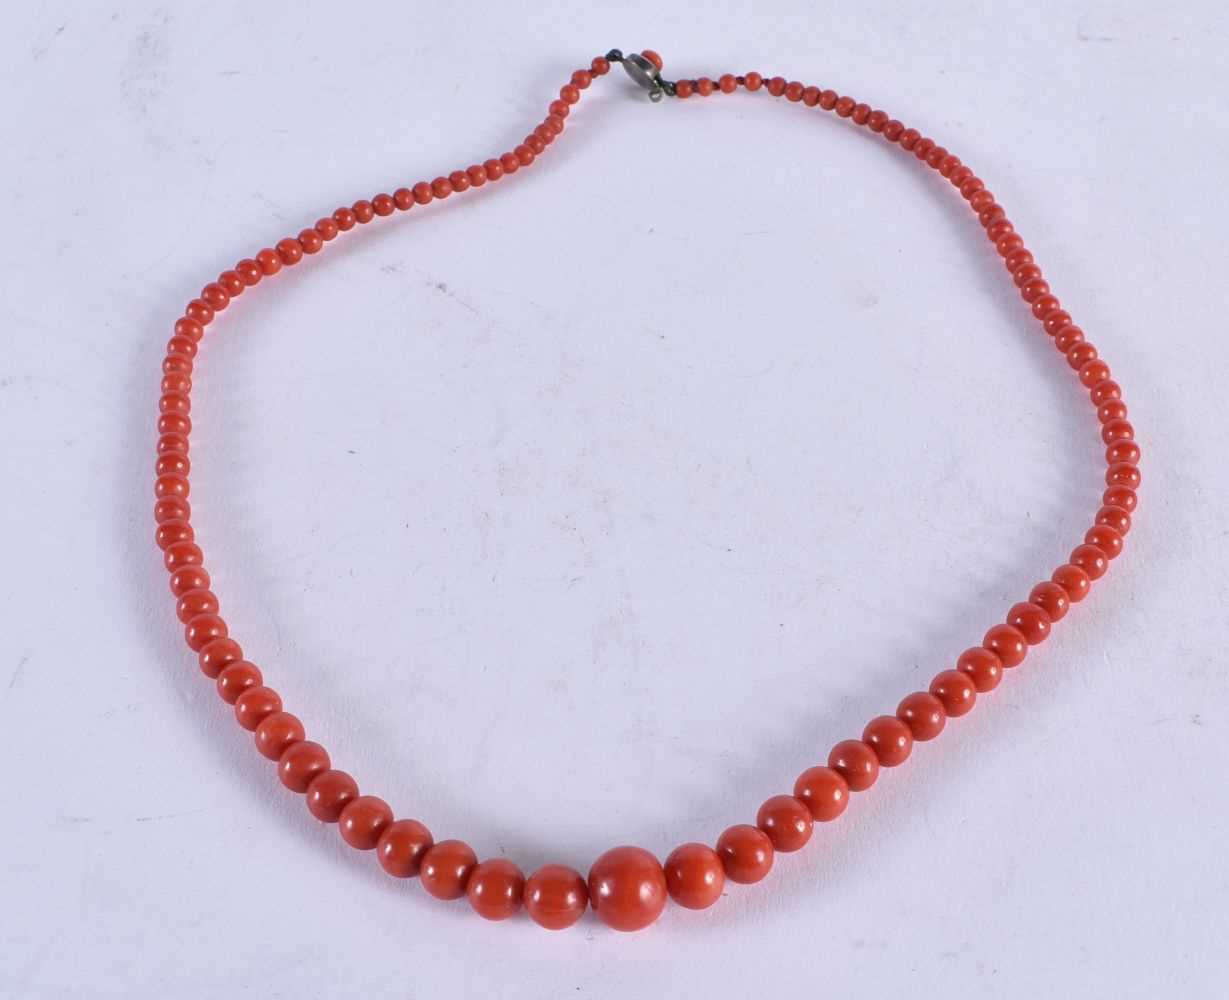 A Blood Coral Bead Necklace. 53cm long, Largest Bead 10mm, weight 28g - Image 2 of 10